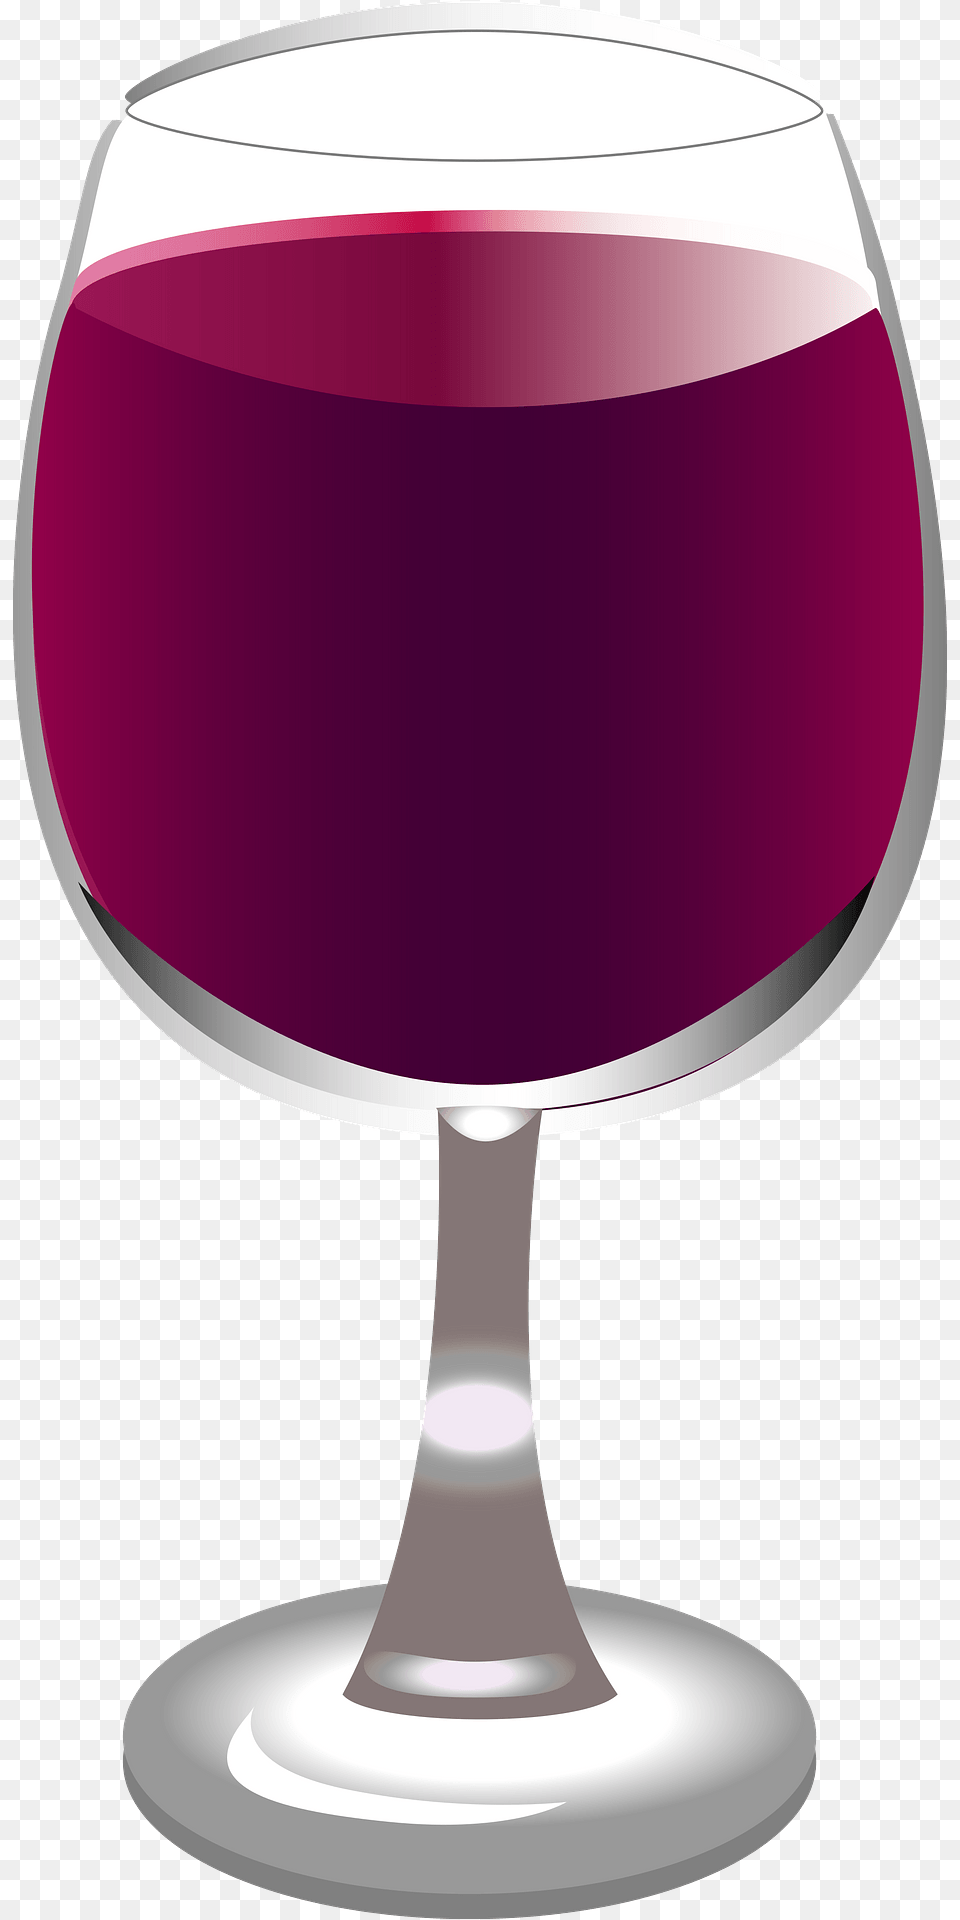 Full Wine Glass Clipart, Alcohol, Beverage, Liquor, Red Wine Png